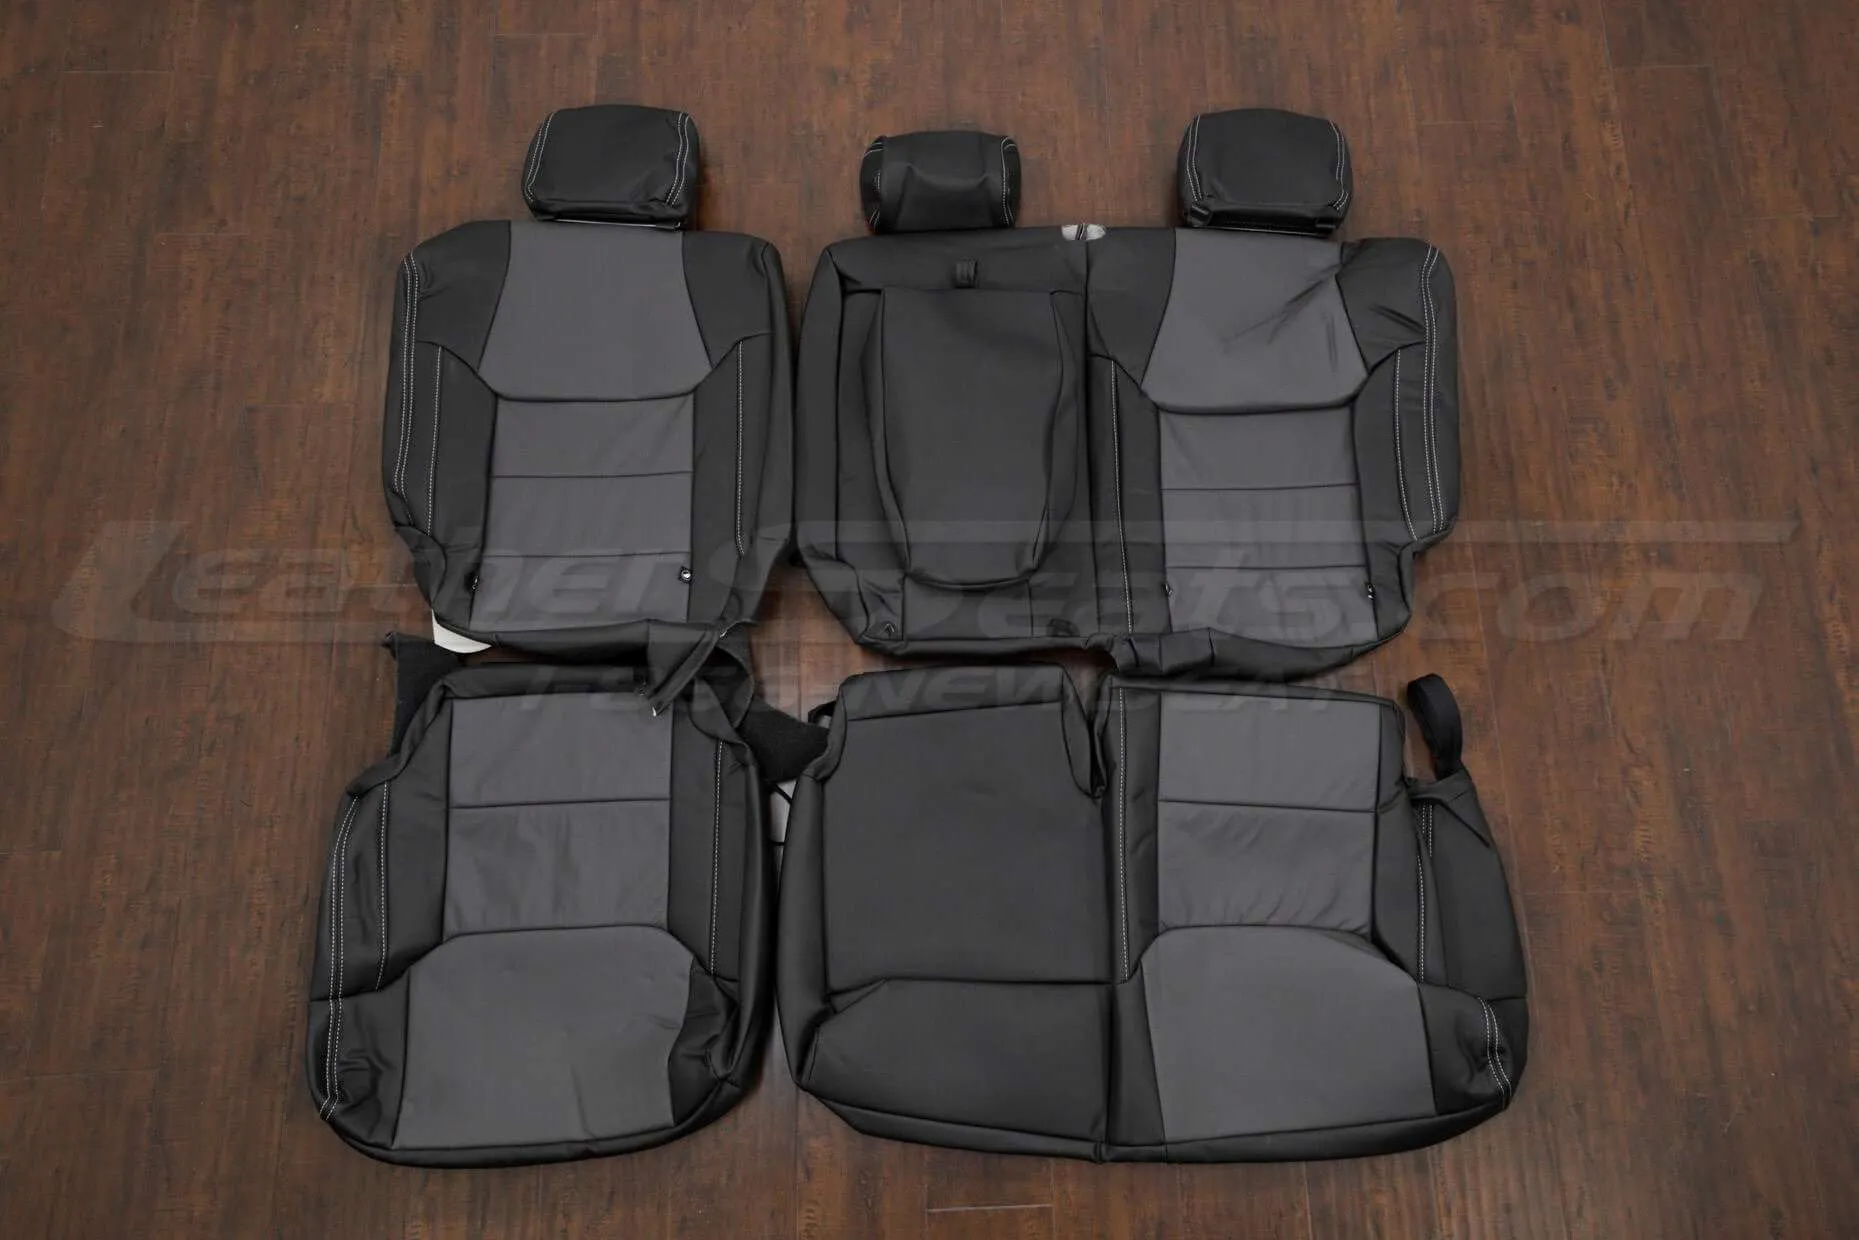 Toyota Tundra Leather Seat Kit - Black & Charcoal - Rear seat upholstery w/ Armrest